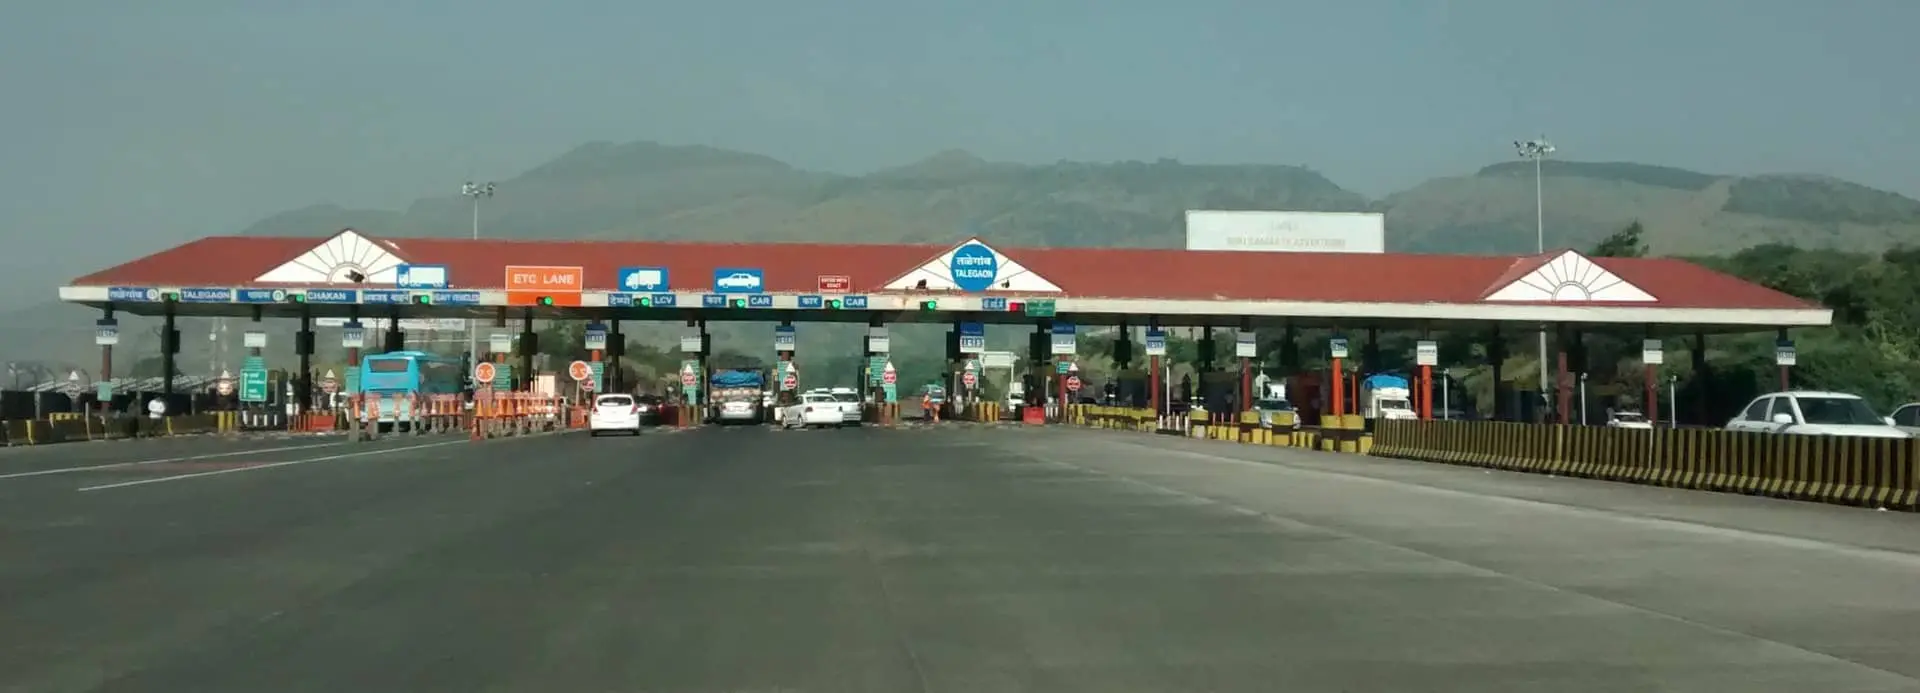 India is set to implement a satellite-based toll payment system across its national highways.